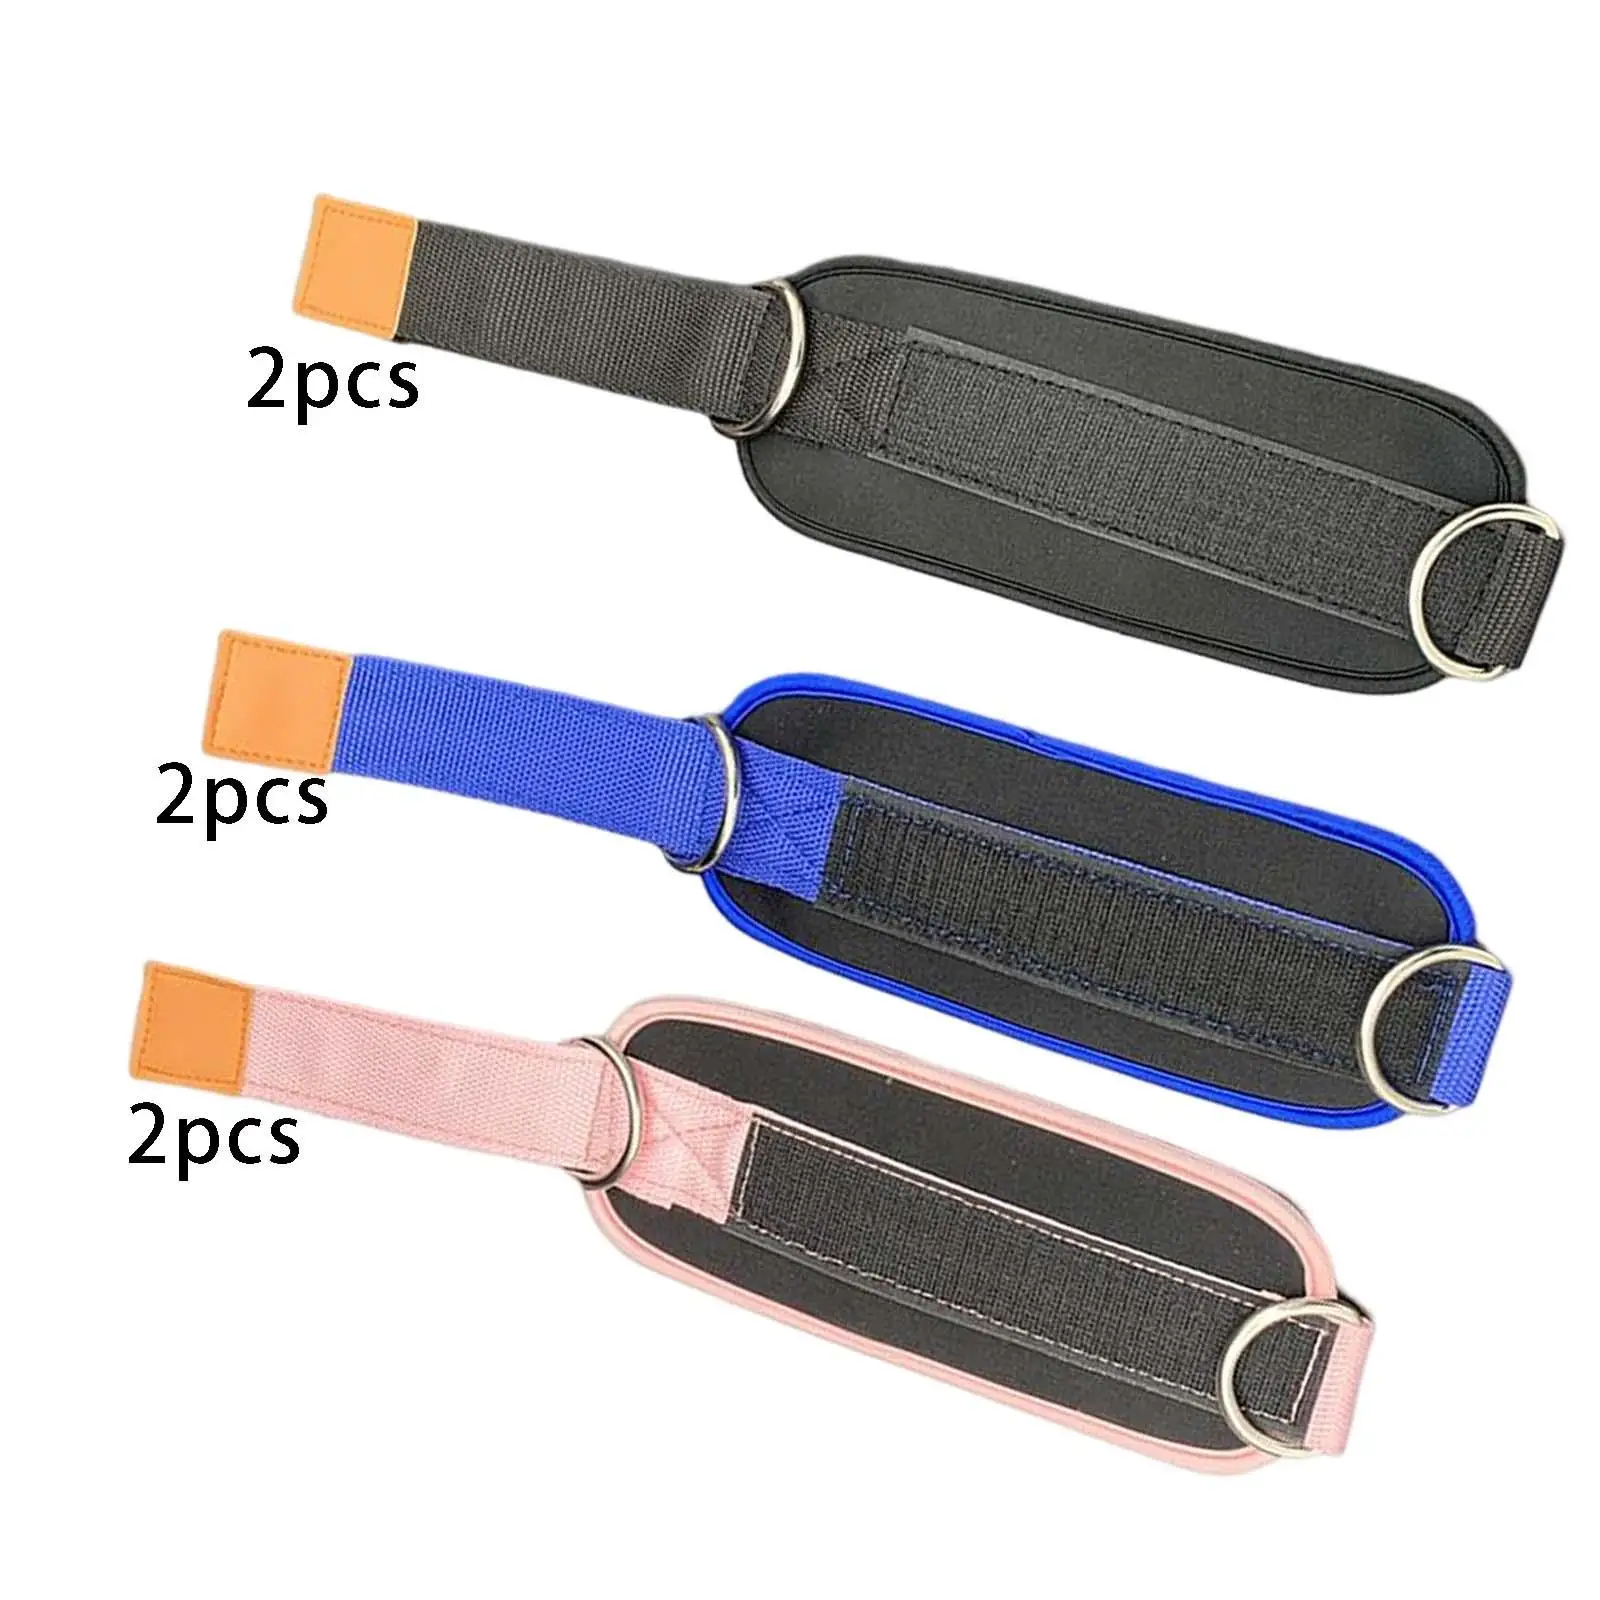  Straps for Cable Machine Attachments for Glute Workouts Leg Extensions